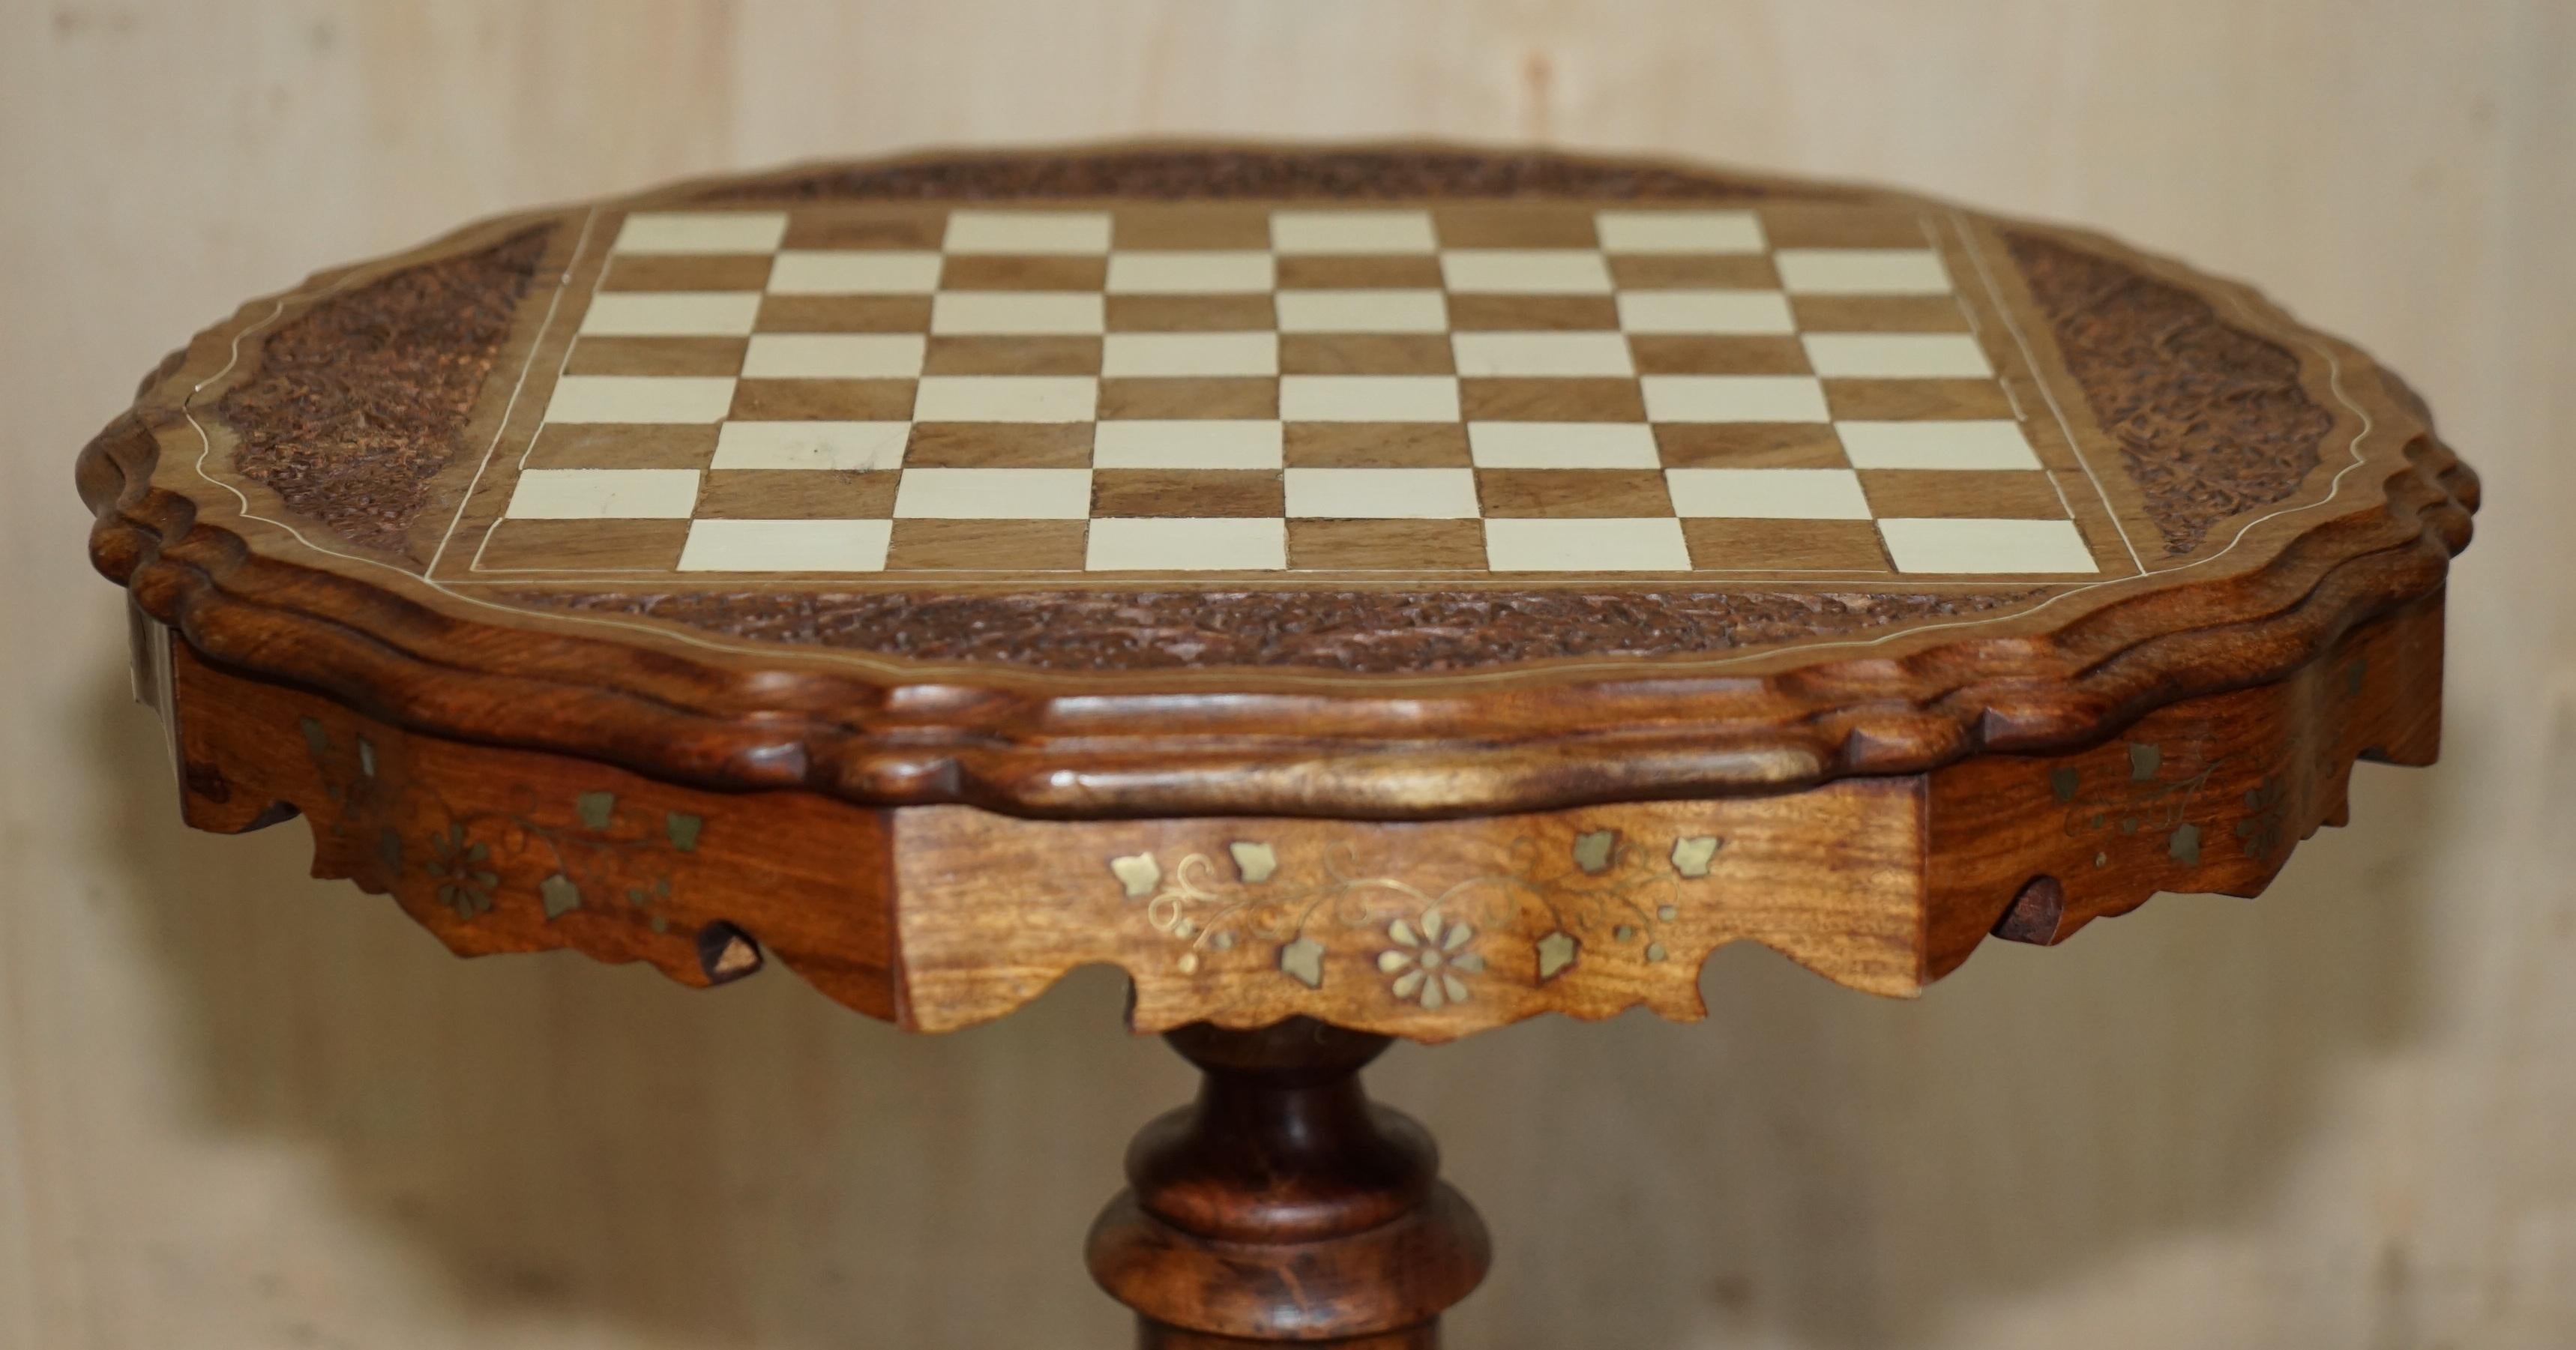 Burmese Fine Antique circa 1880 Anglo Indian Hardwood Brass Inlaid Chess Games Table